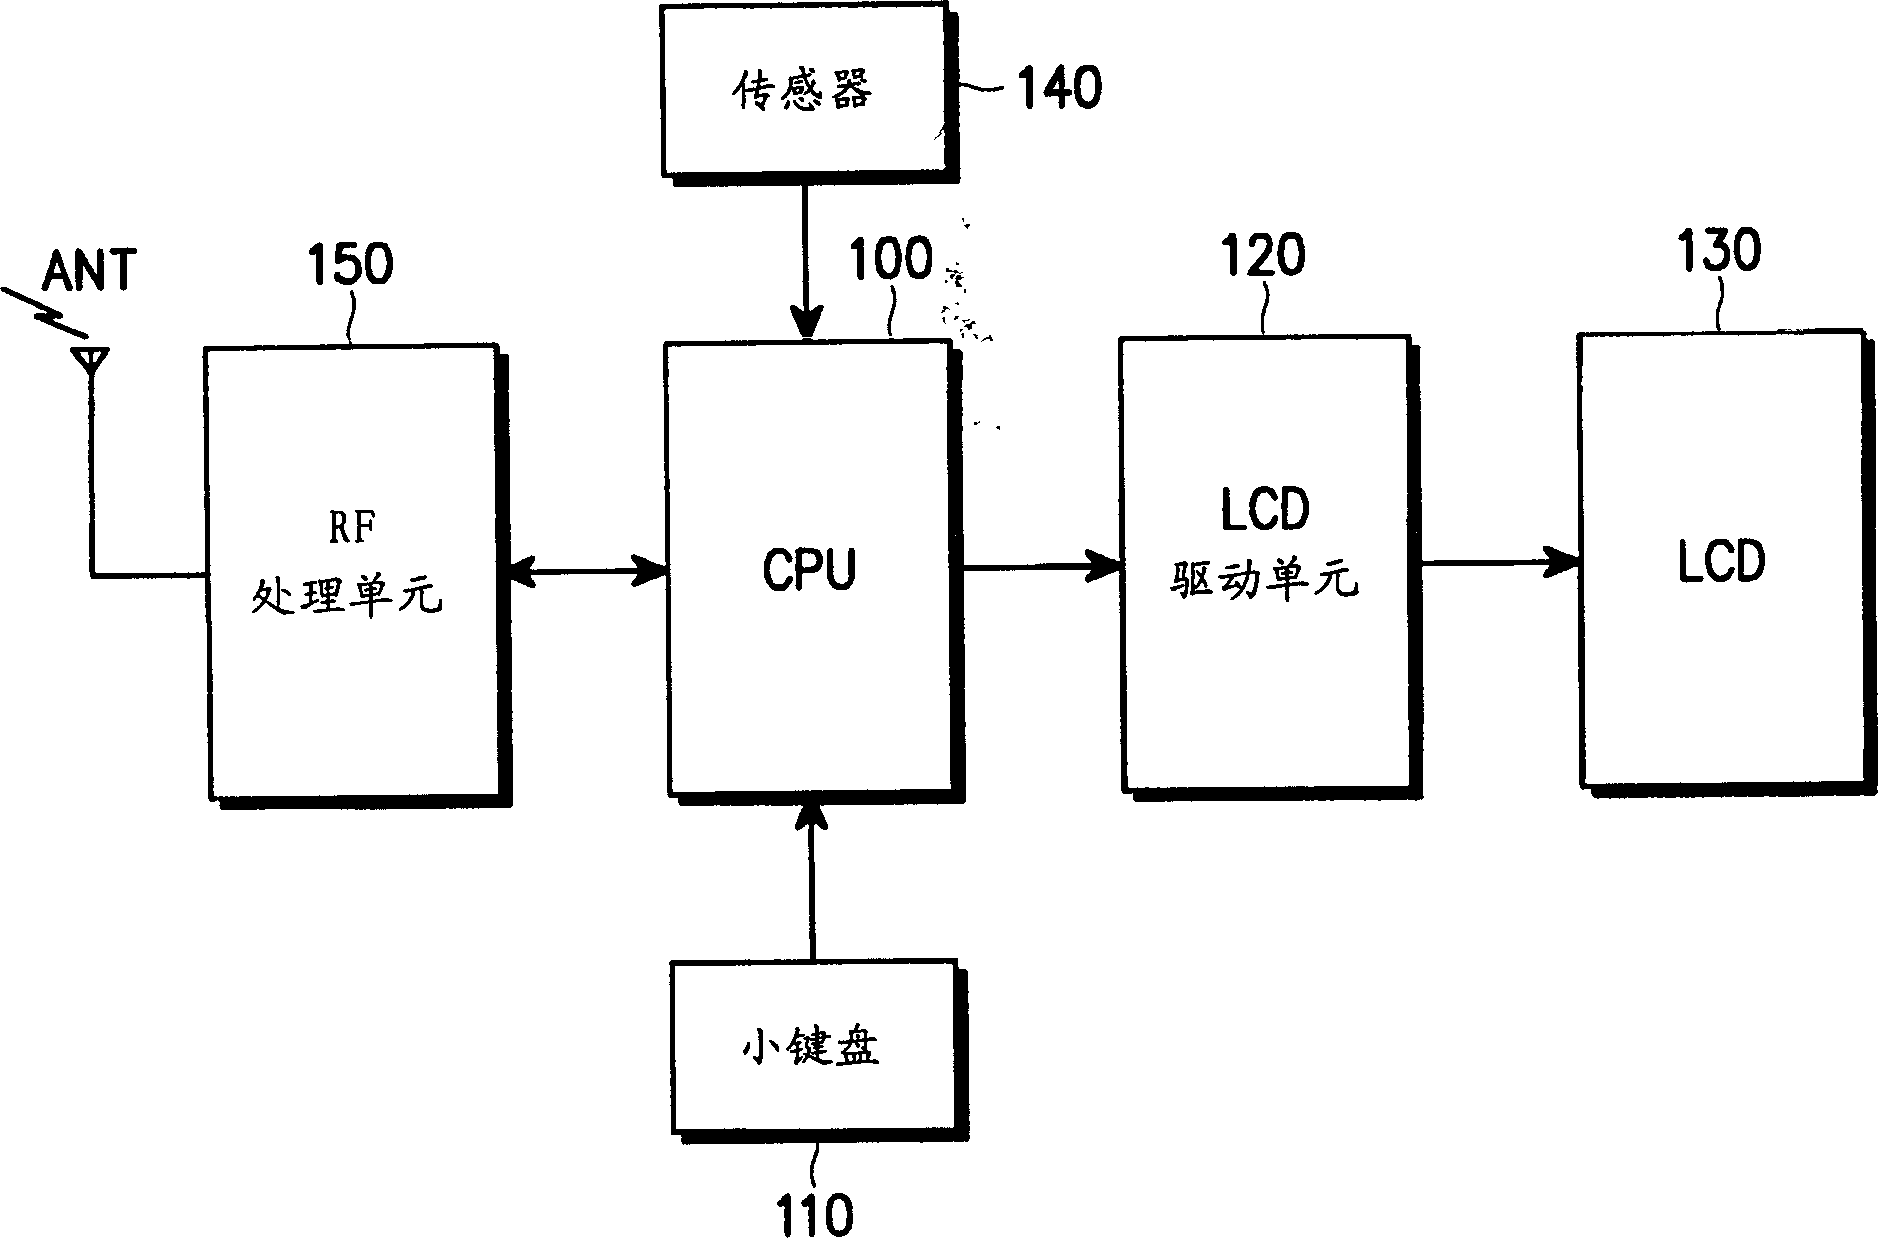 Method of changing display direction of mobile phone